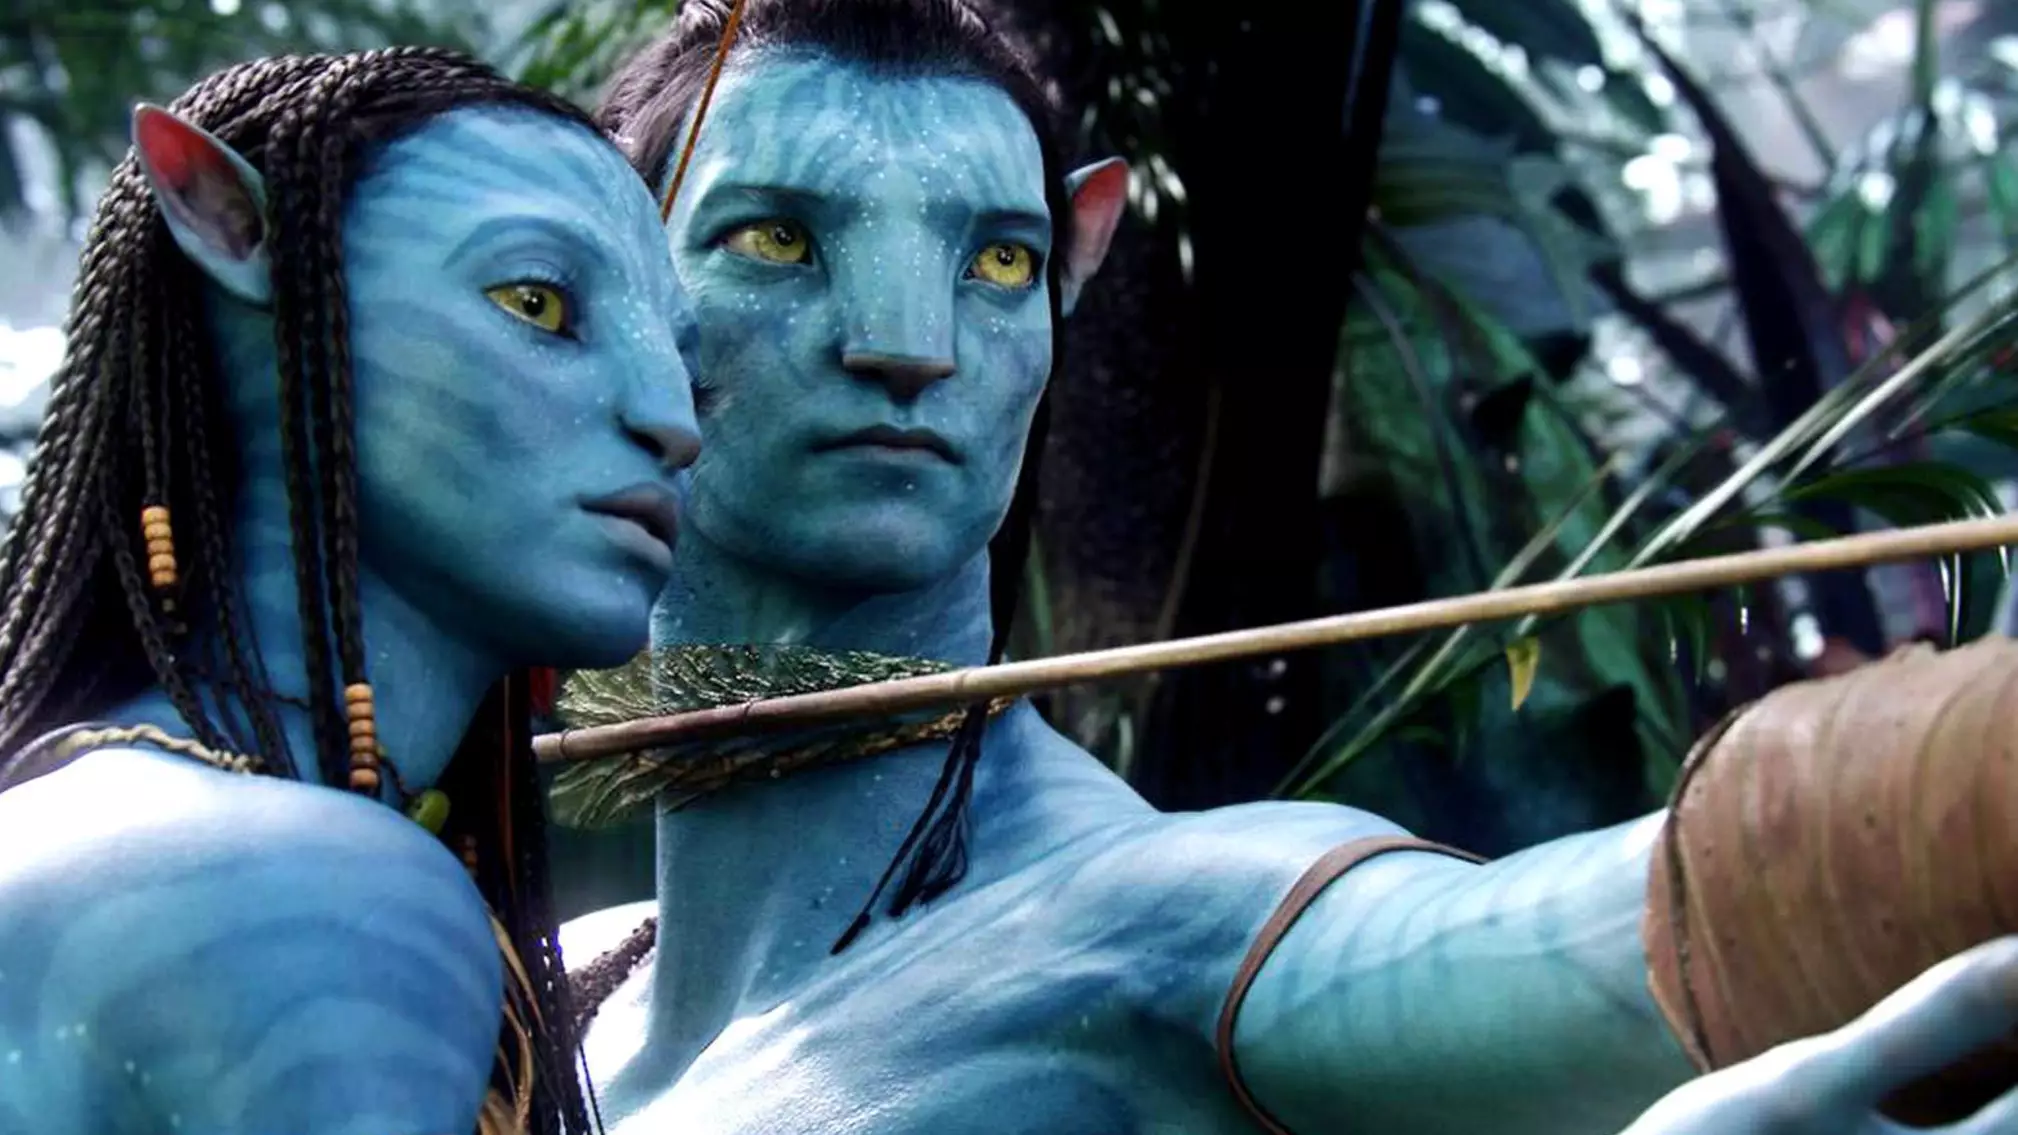 James Cameron Begins Production On Four 'Avatar' Sequels With $1 Billion Budget